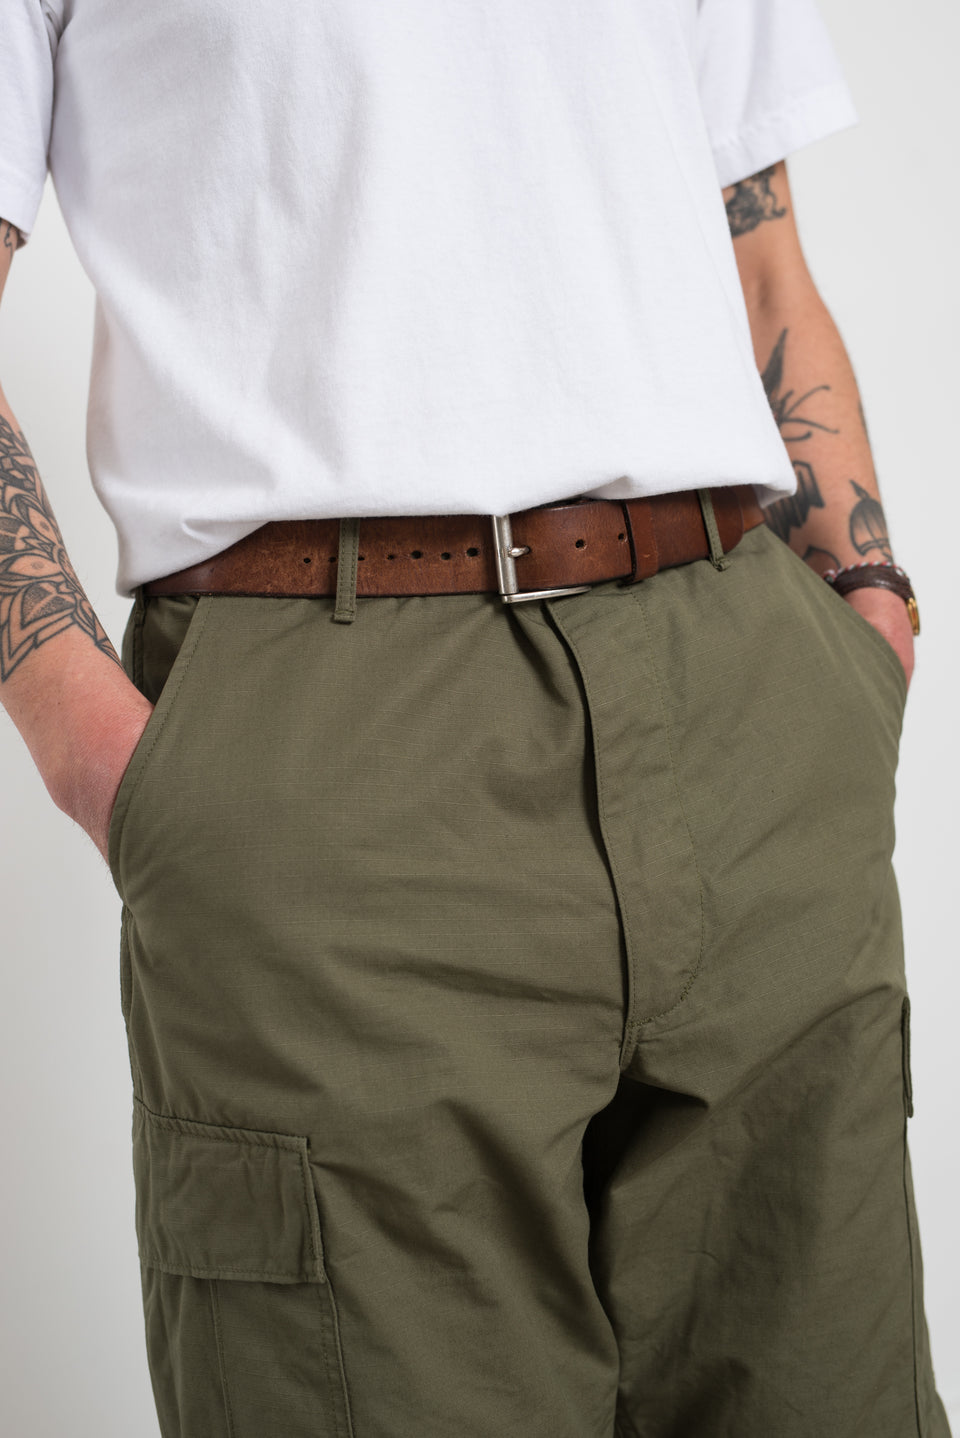 Vintage Fit 6 Pocket Cargo Pants Army Green